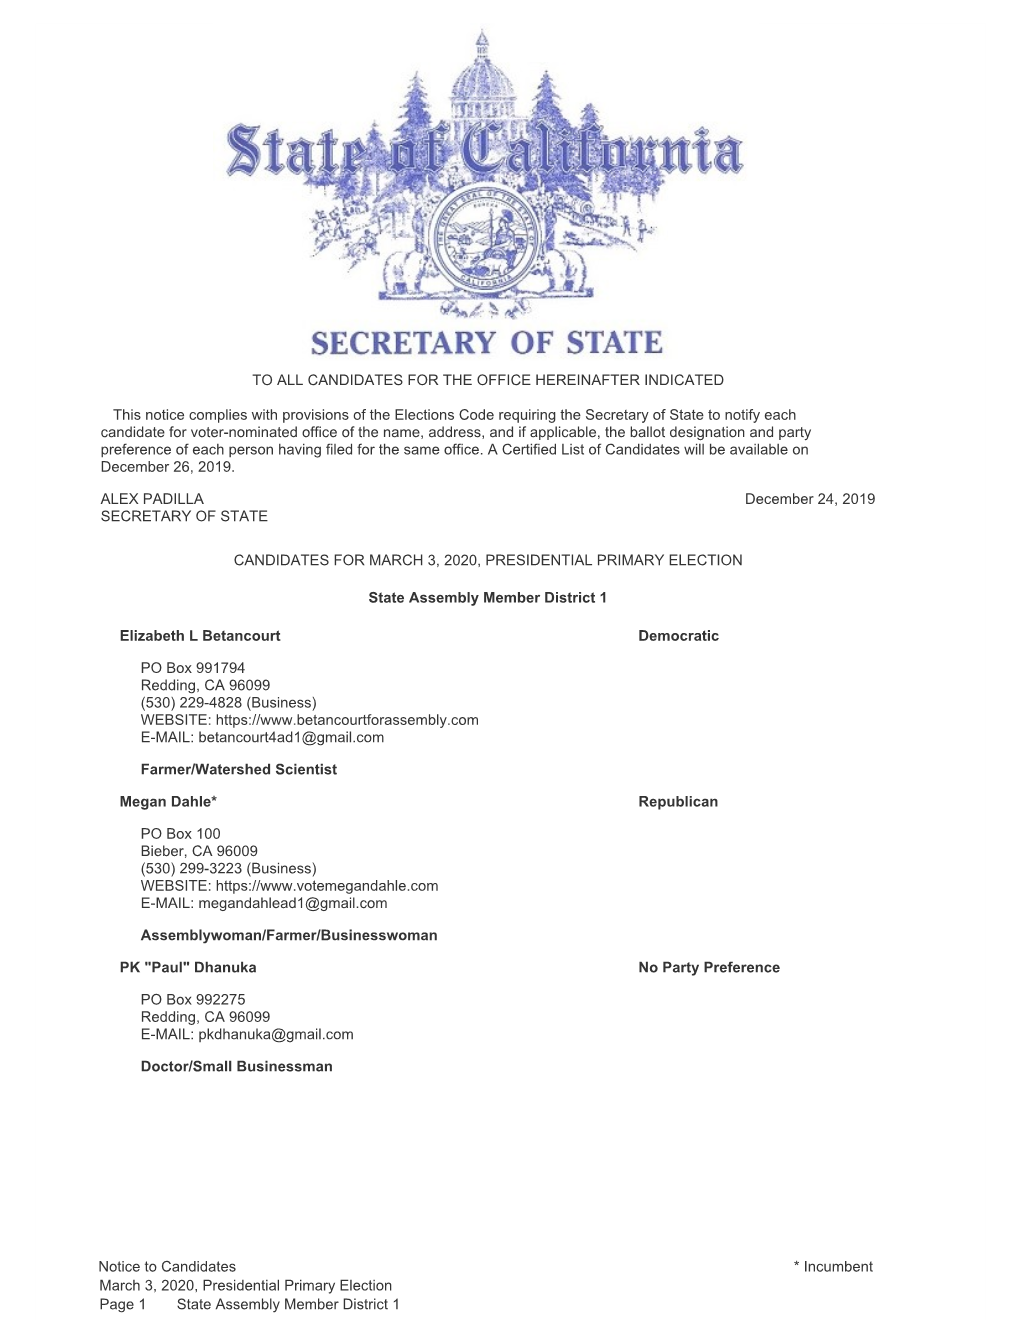 Secretary of State's Notice to Candidates for Assembly Districts